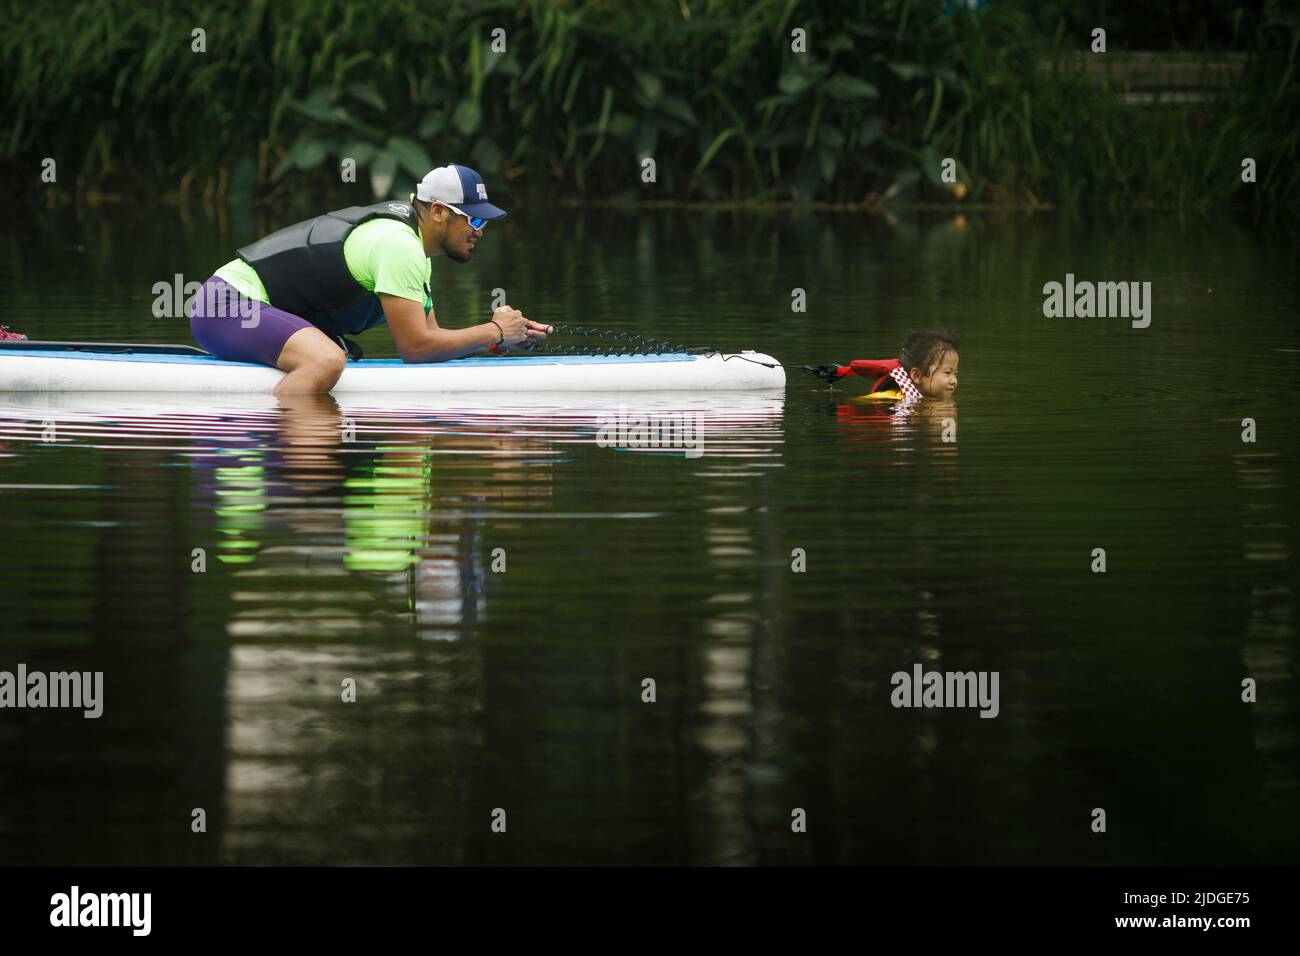 A man assists a girl as she swims in a canal on a hot day on Summer Solstice in Beijing, China, June 21, 2022.  REUTERS/Thomas Peter     TPX IMAGES OF THE DAY Stock Photo